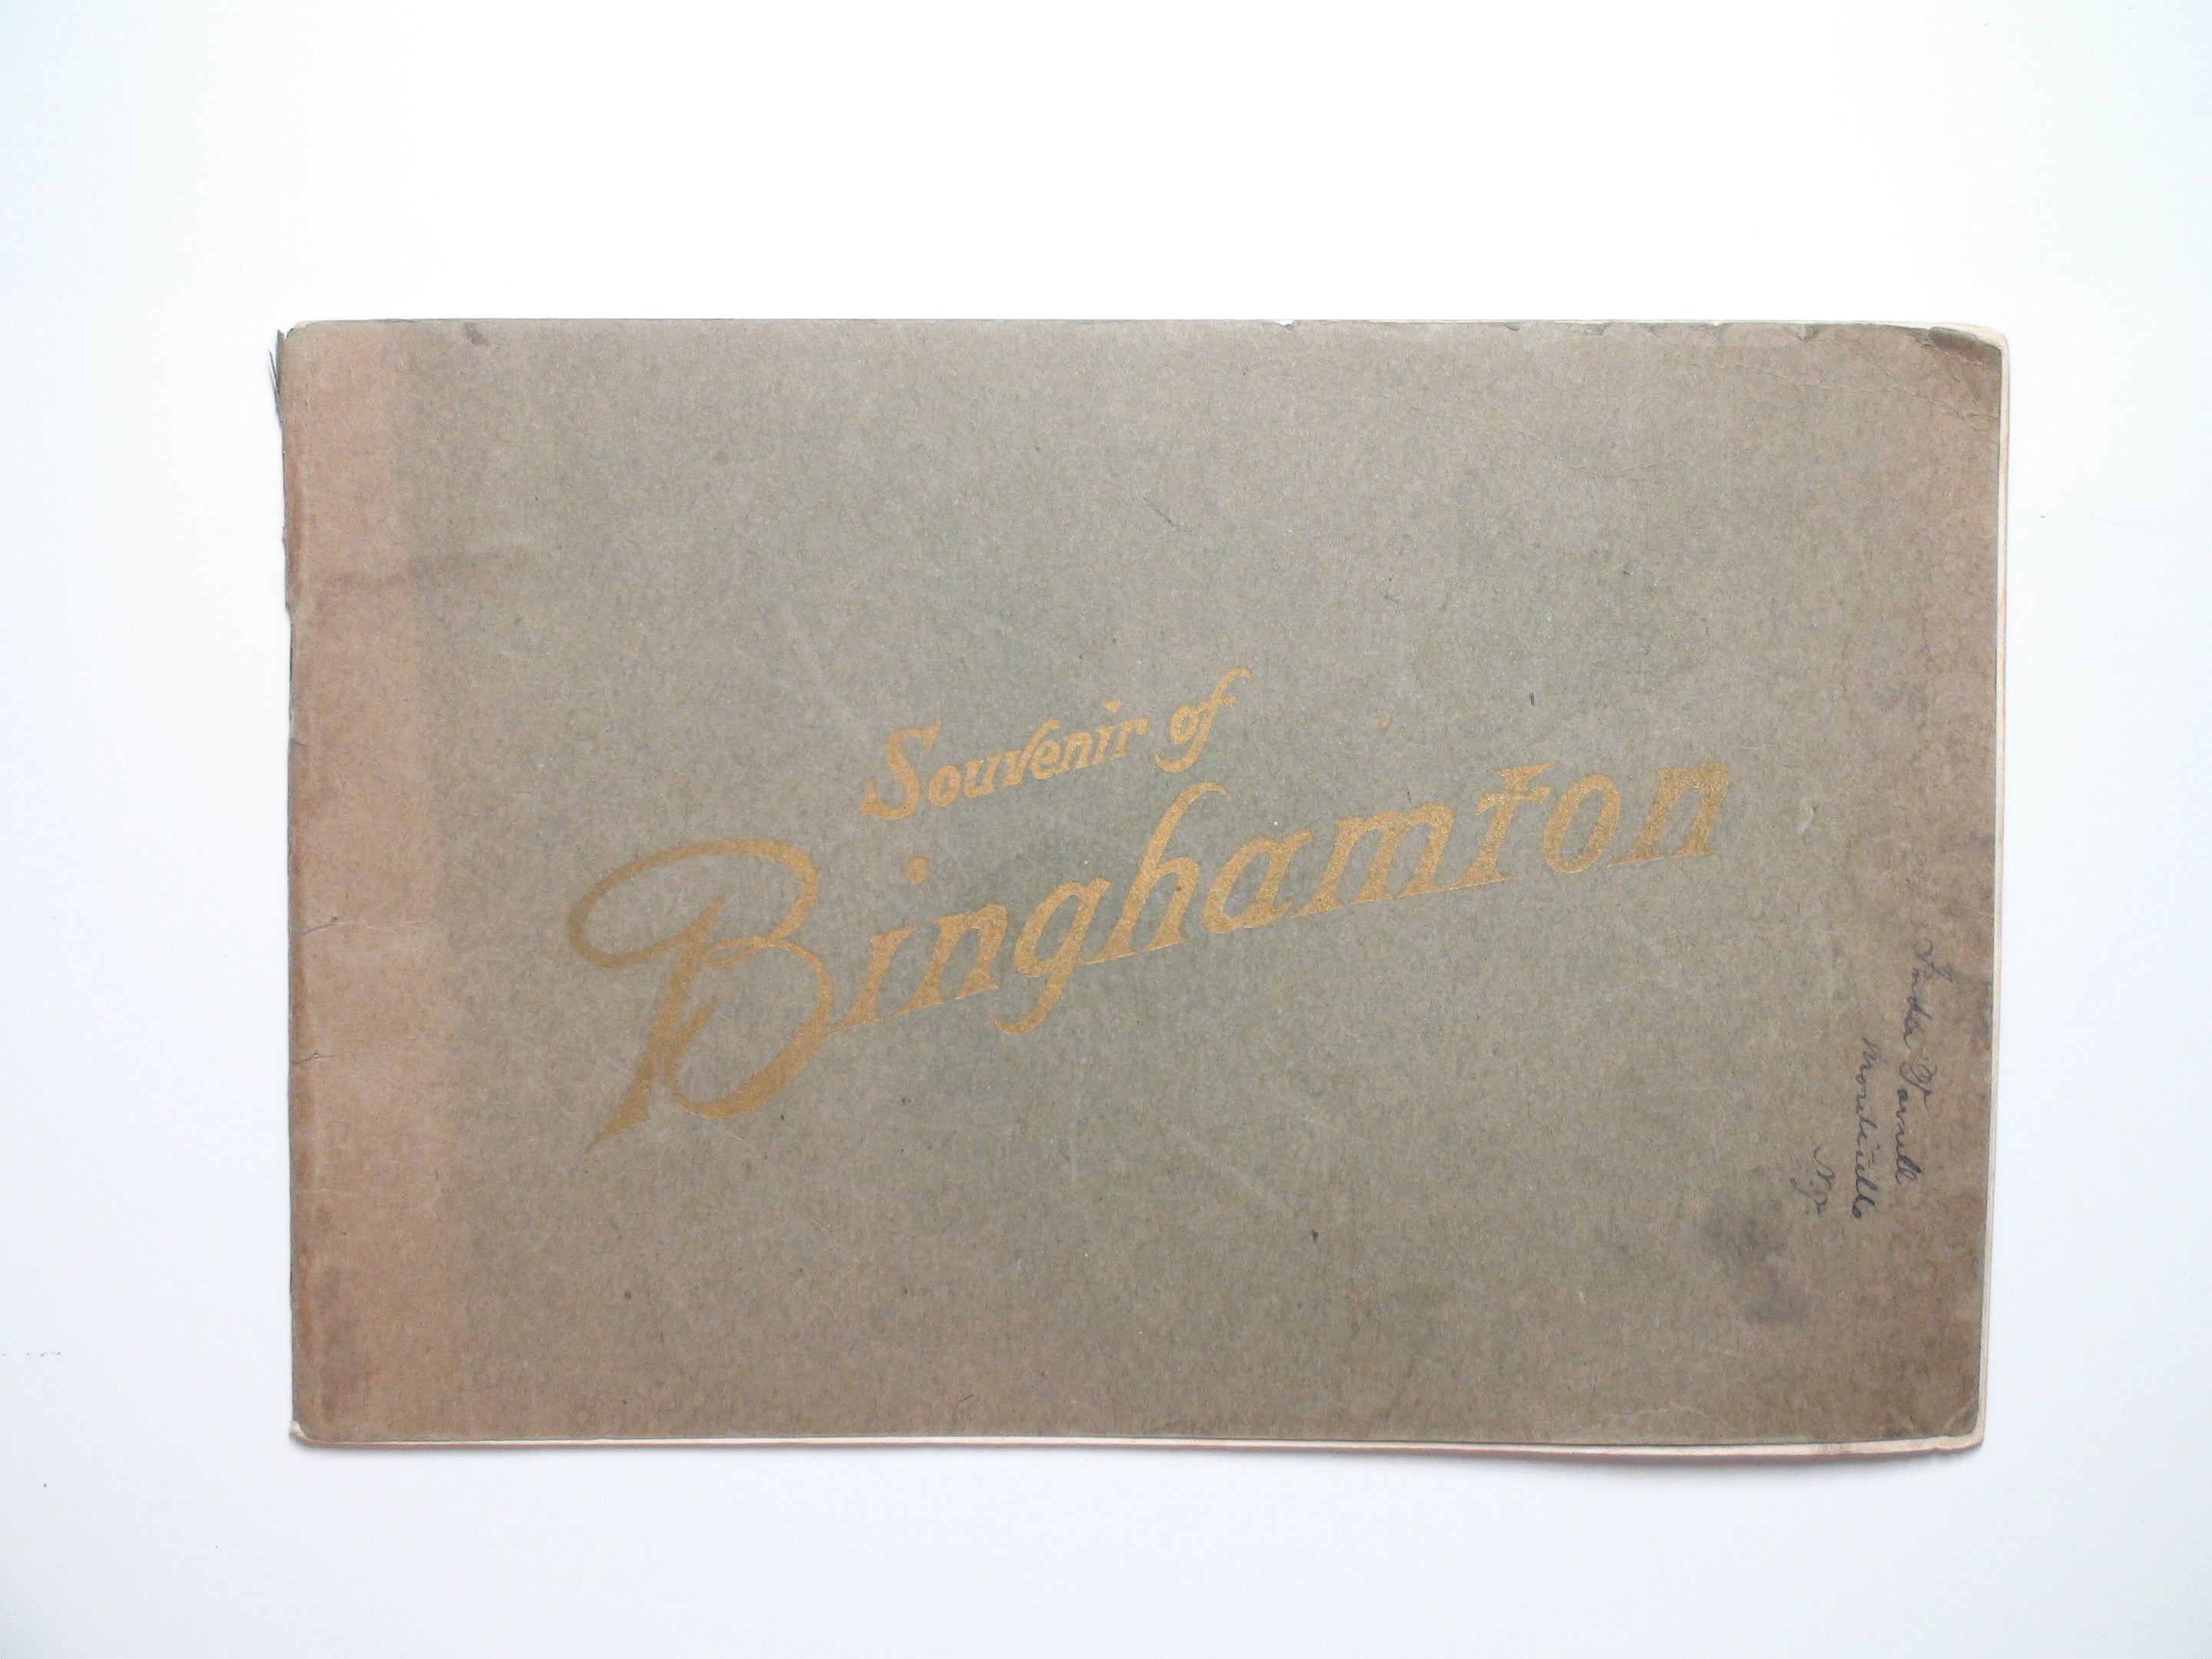 Souvenir of Binghamton, NY, A City of Homes, Published by CS Woolworth